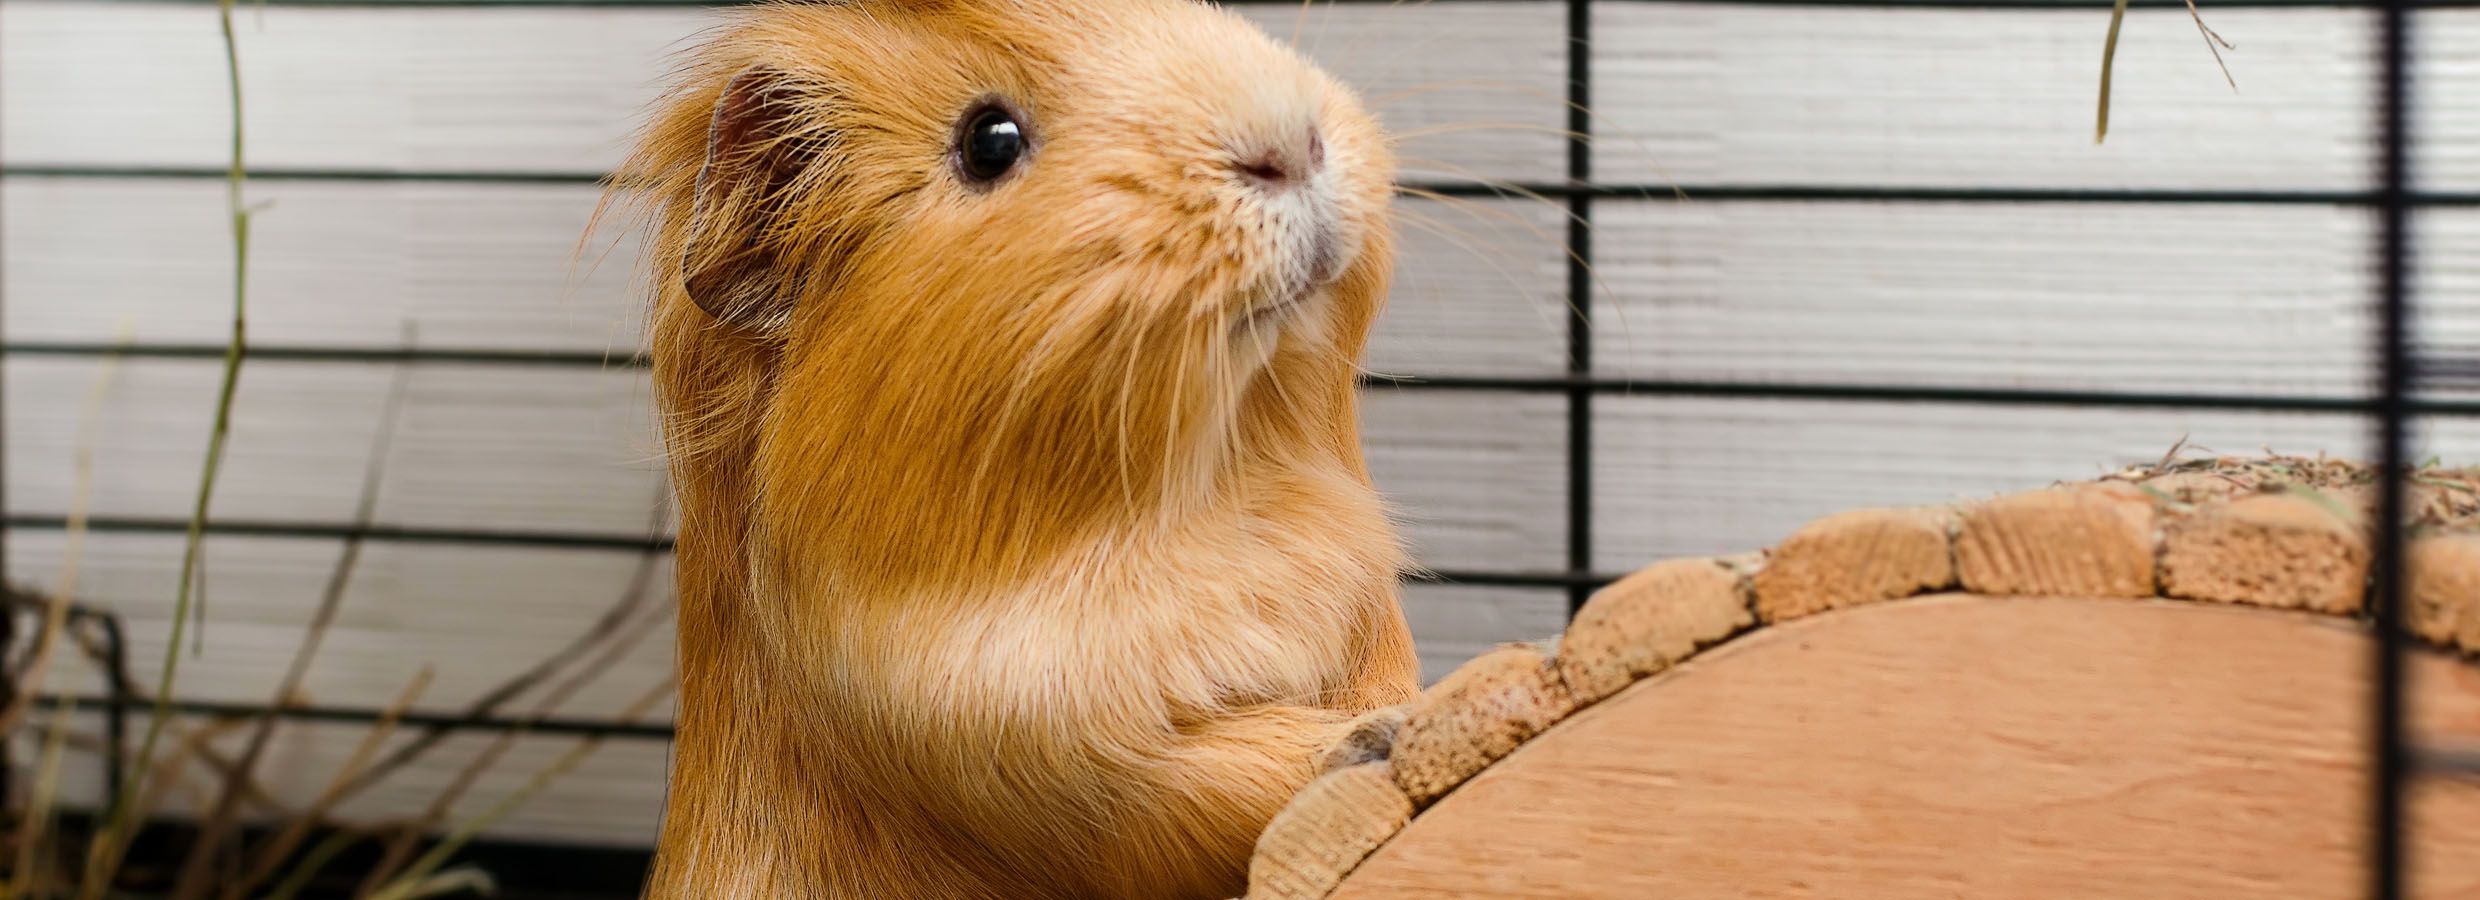 how much fi guinea pigs cost at petsmart｜TikTok Search